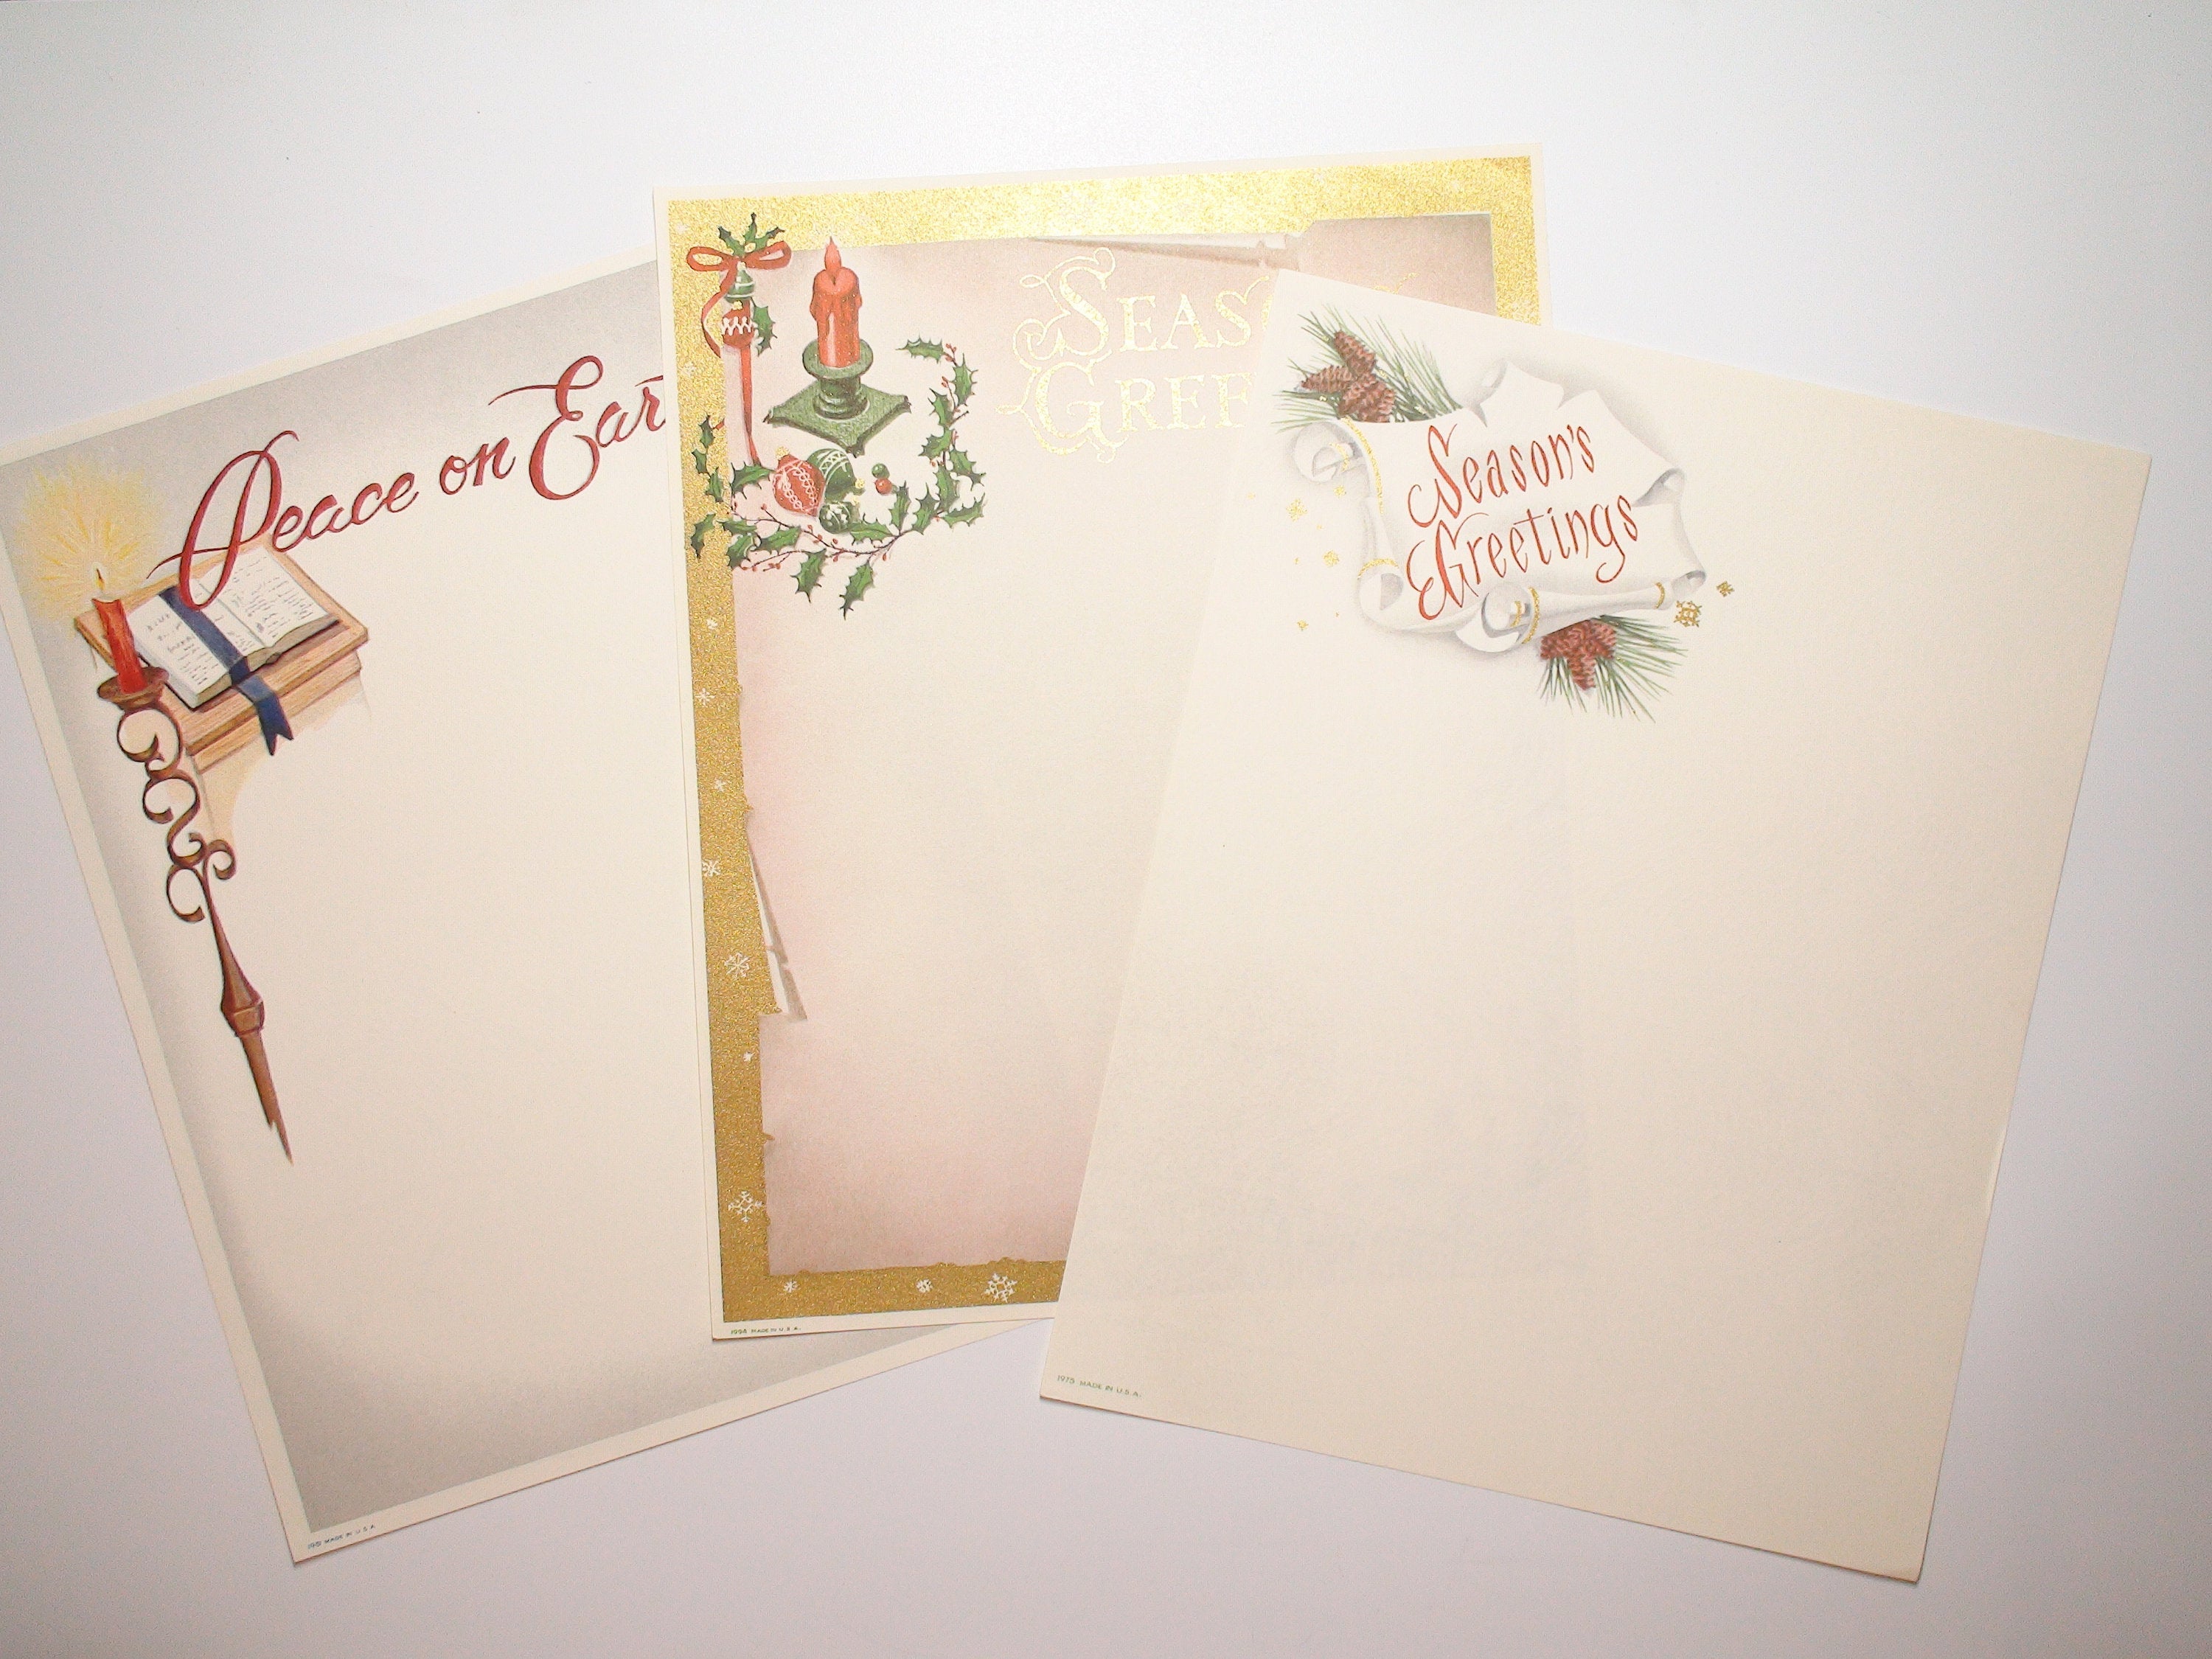 20 Sheets of Vintage Christmas Holiday Border Stationery/Letterhead for Notes and Letters, Gilt Accents, c1960s-80s